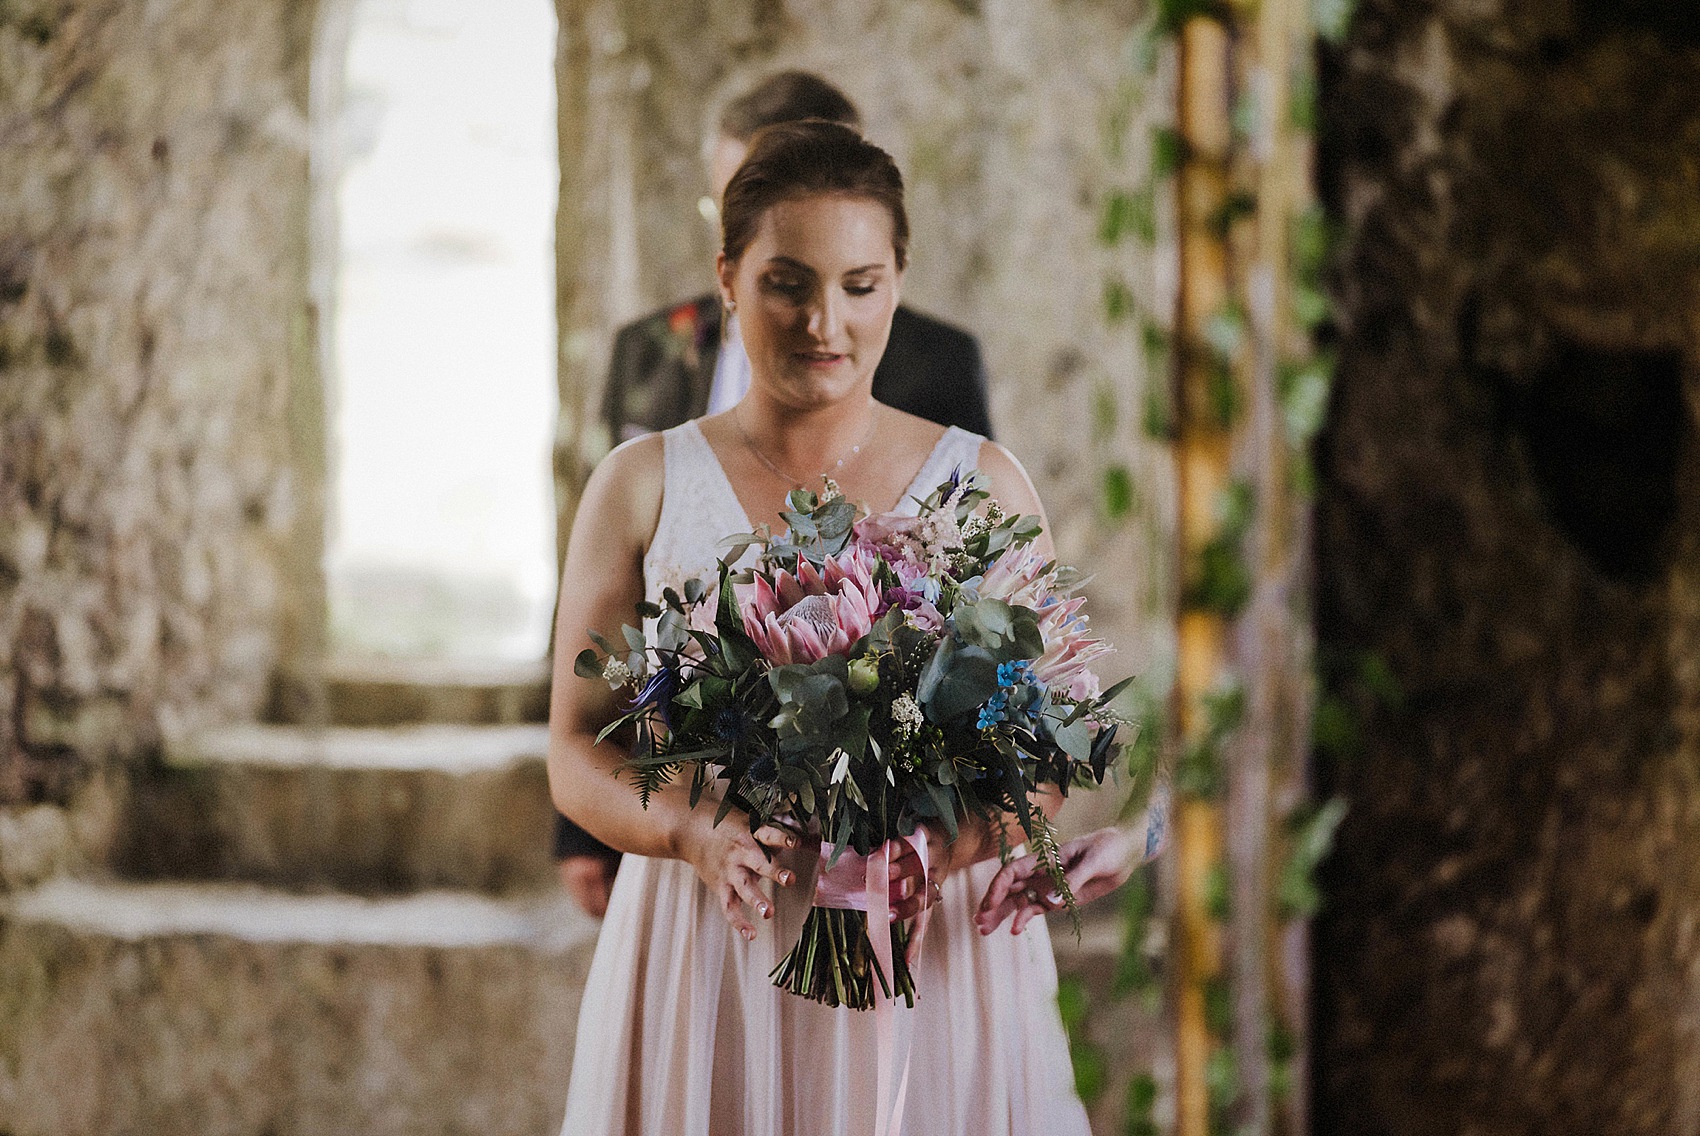 Blush pink Catherine Deane wedding dress  - A Blush Pink Catherine Deane Dress for a Welsh Castle Wedding With 700 Japanese Origami Paper Cranes